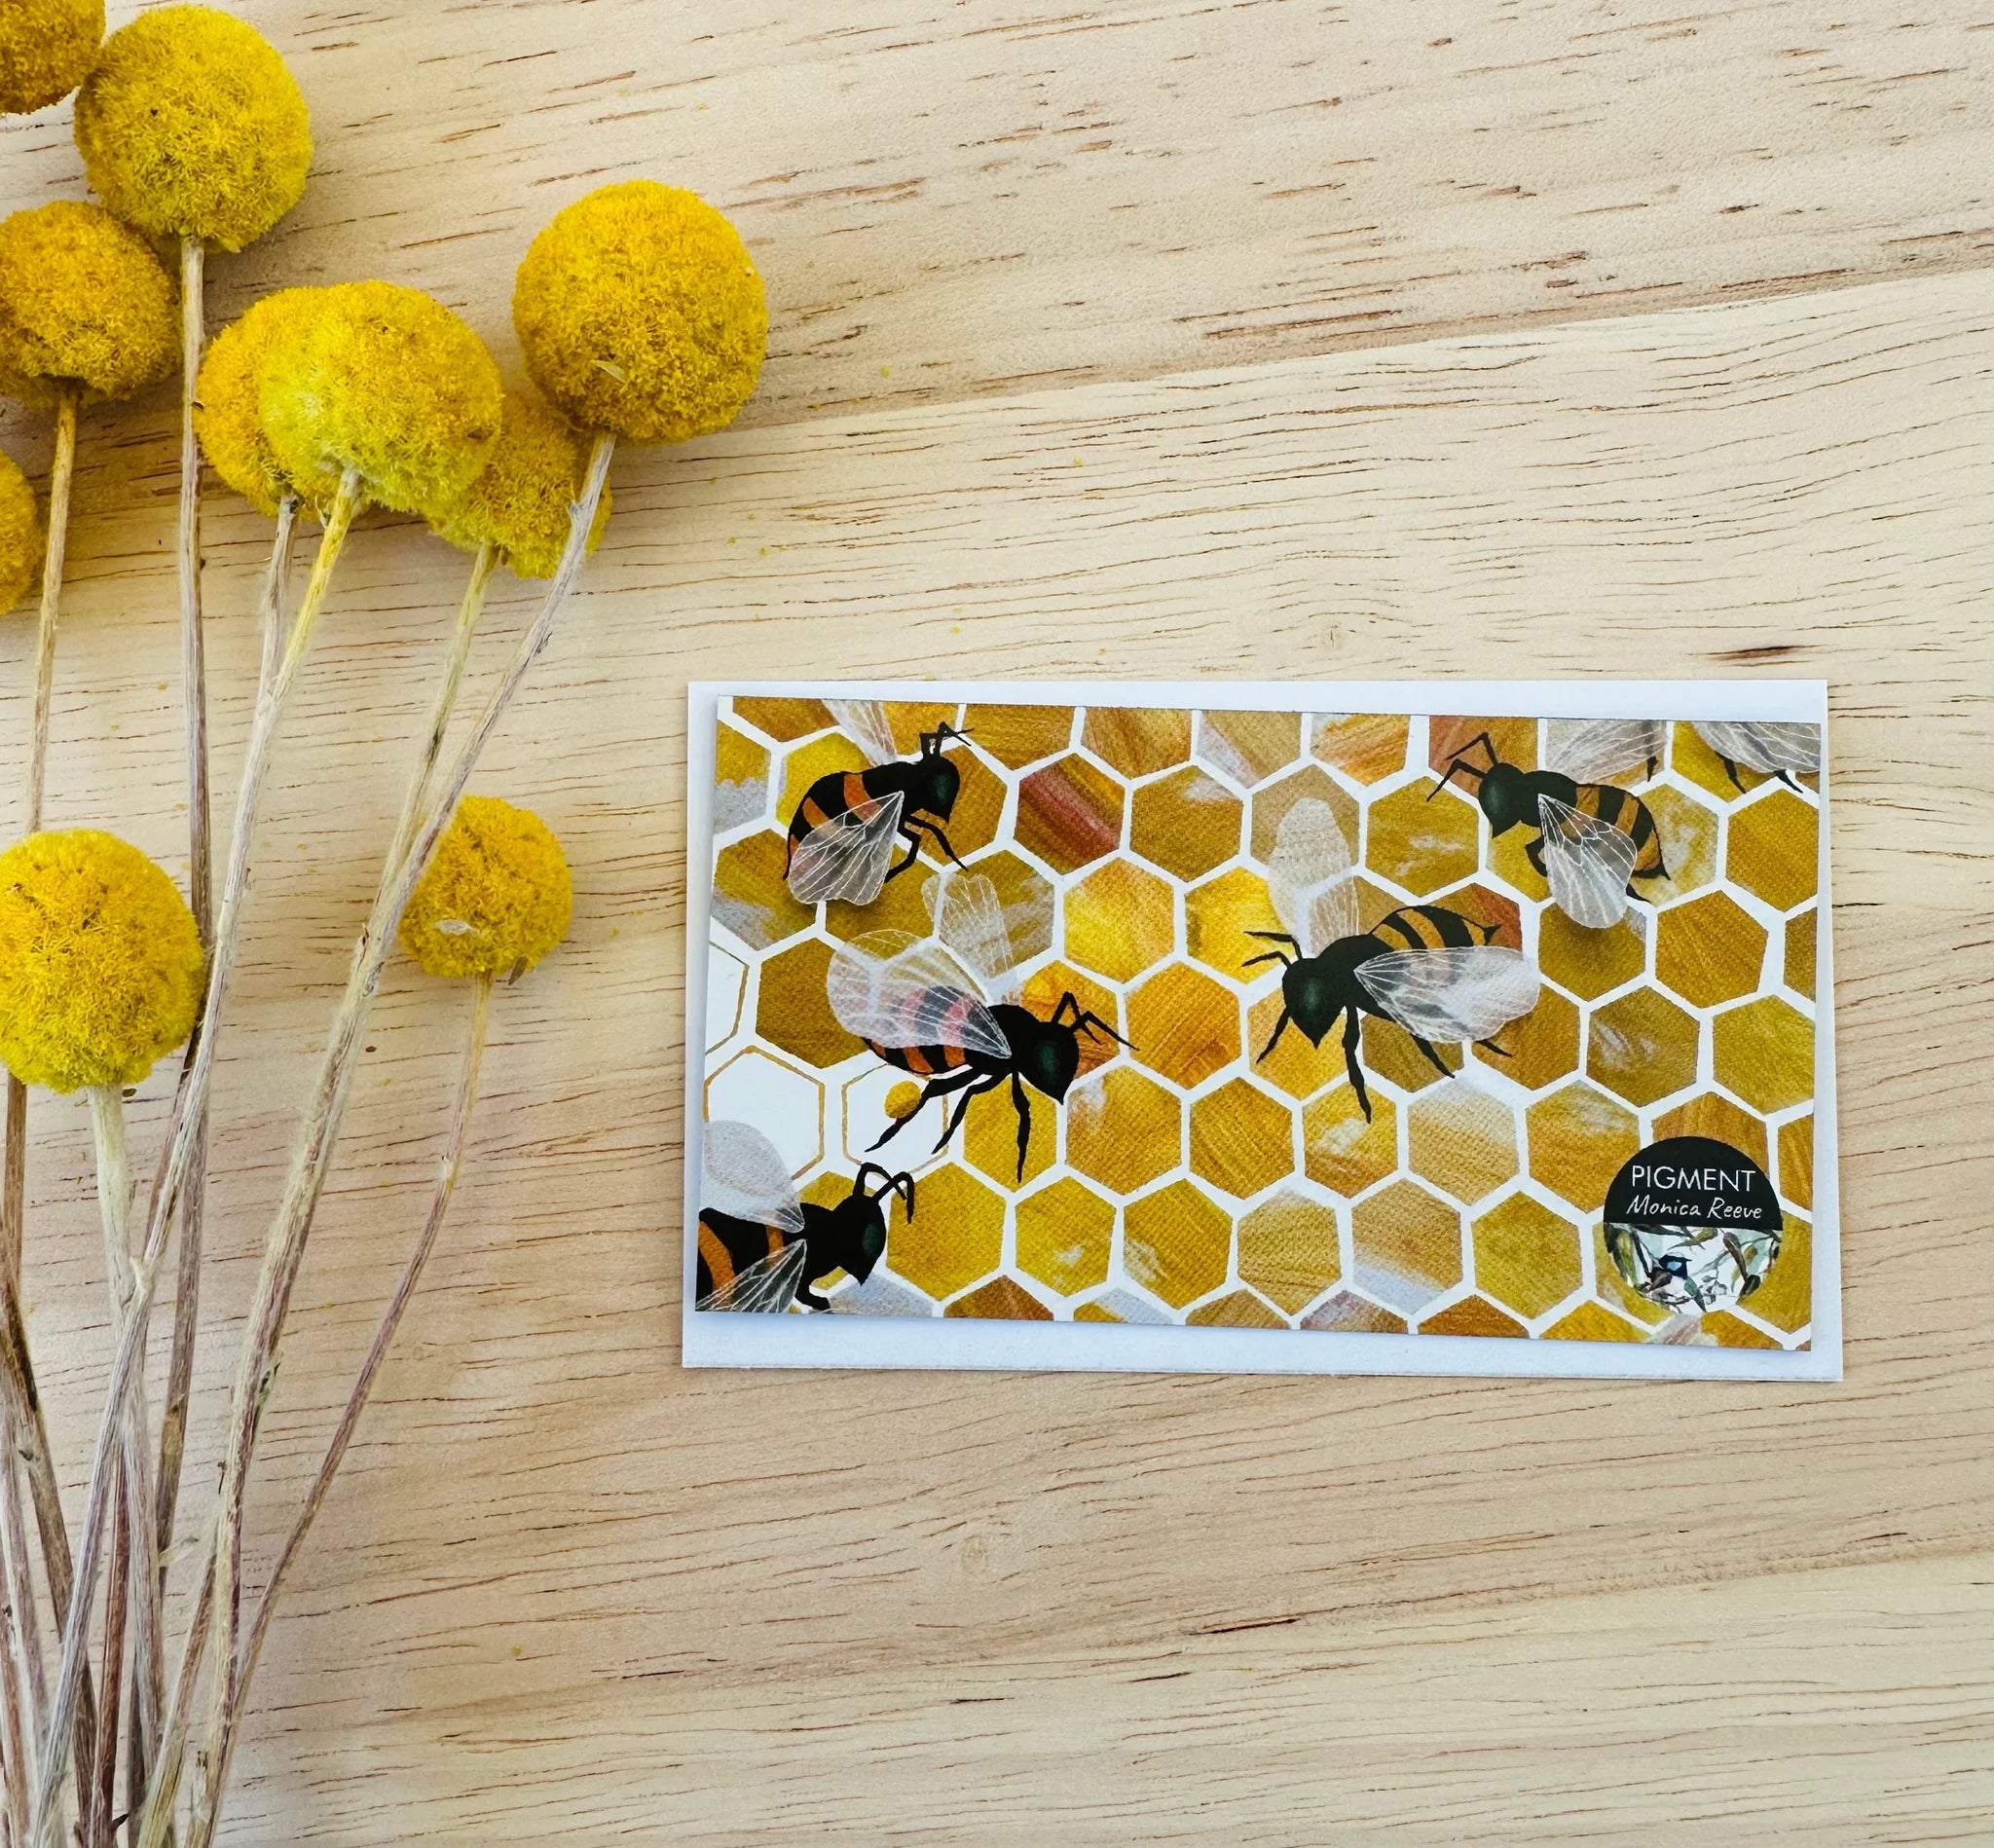 Tasmanian Magnets PIGMENT by Monica Reeve magnet Monica Reeve Honey Bee 